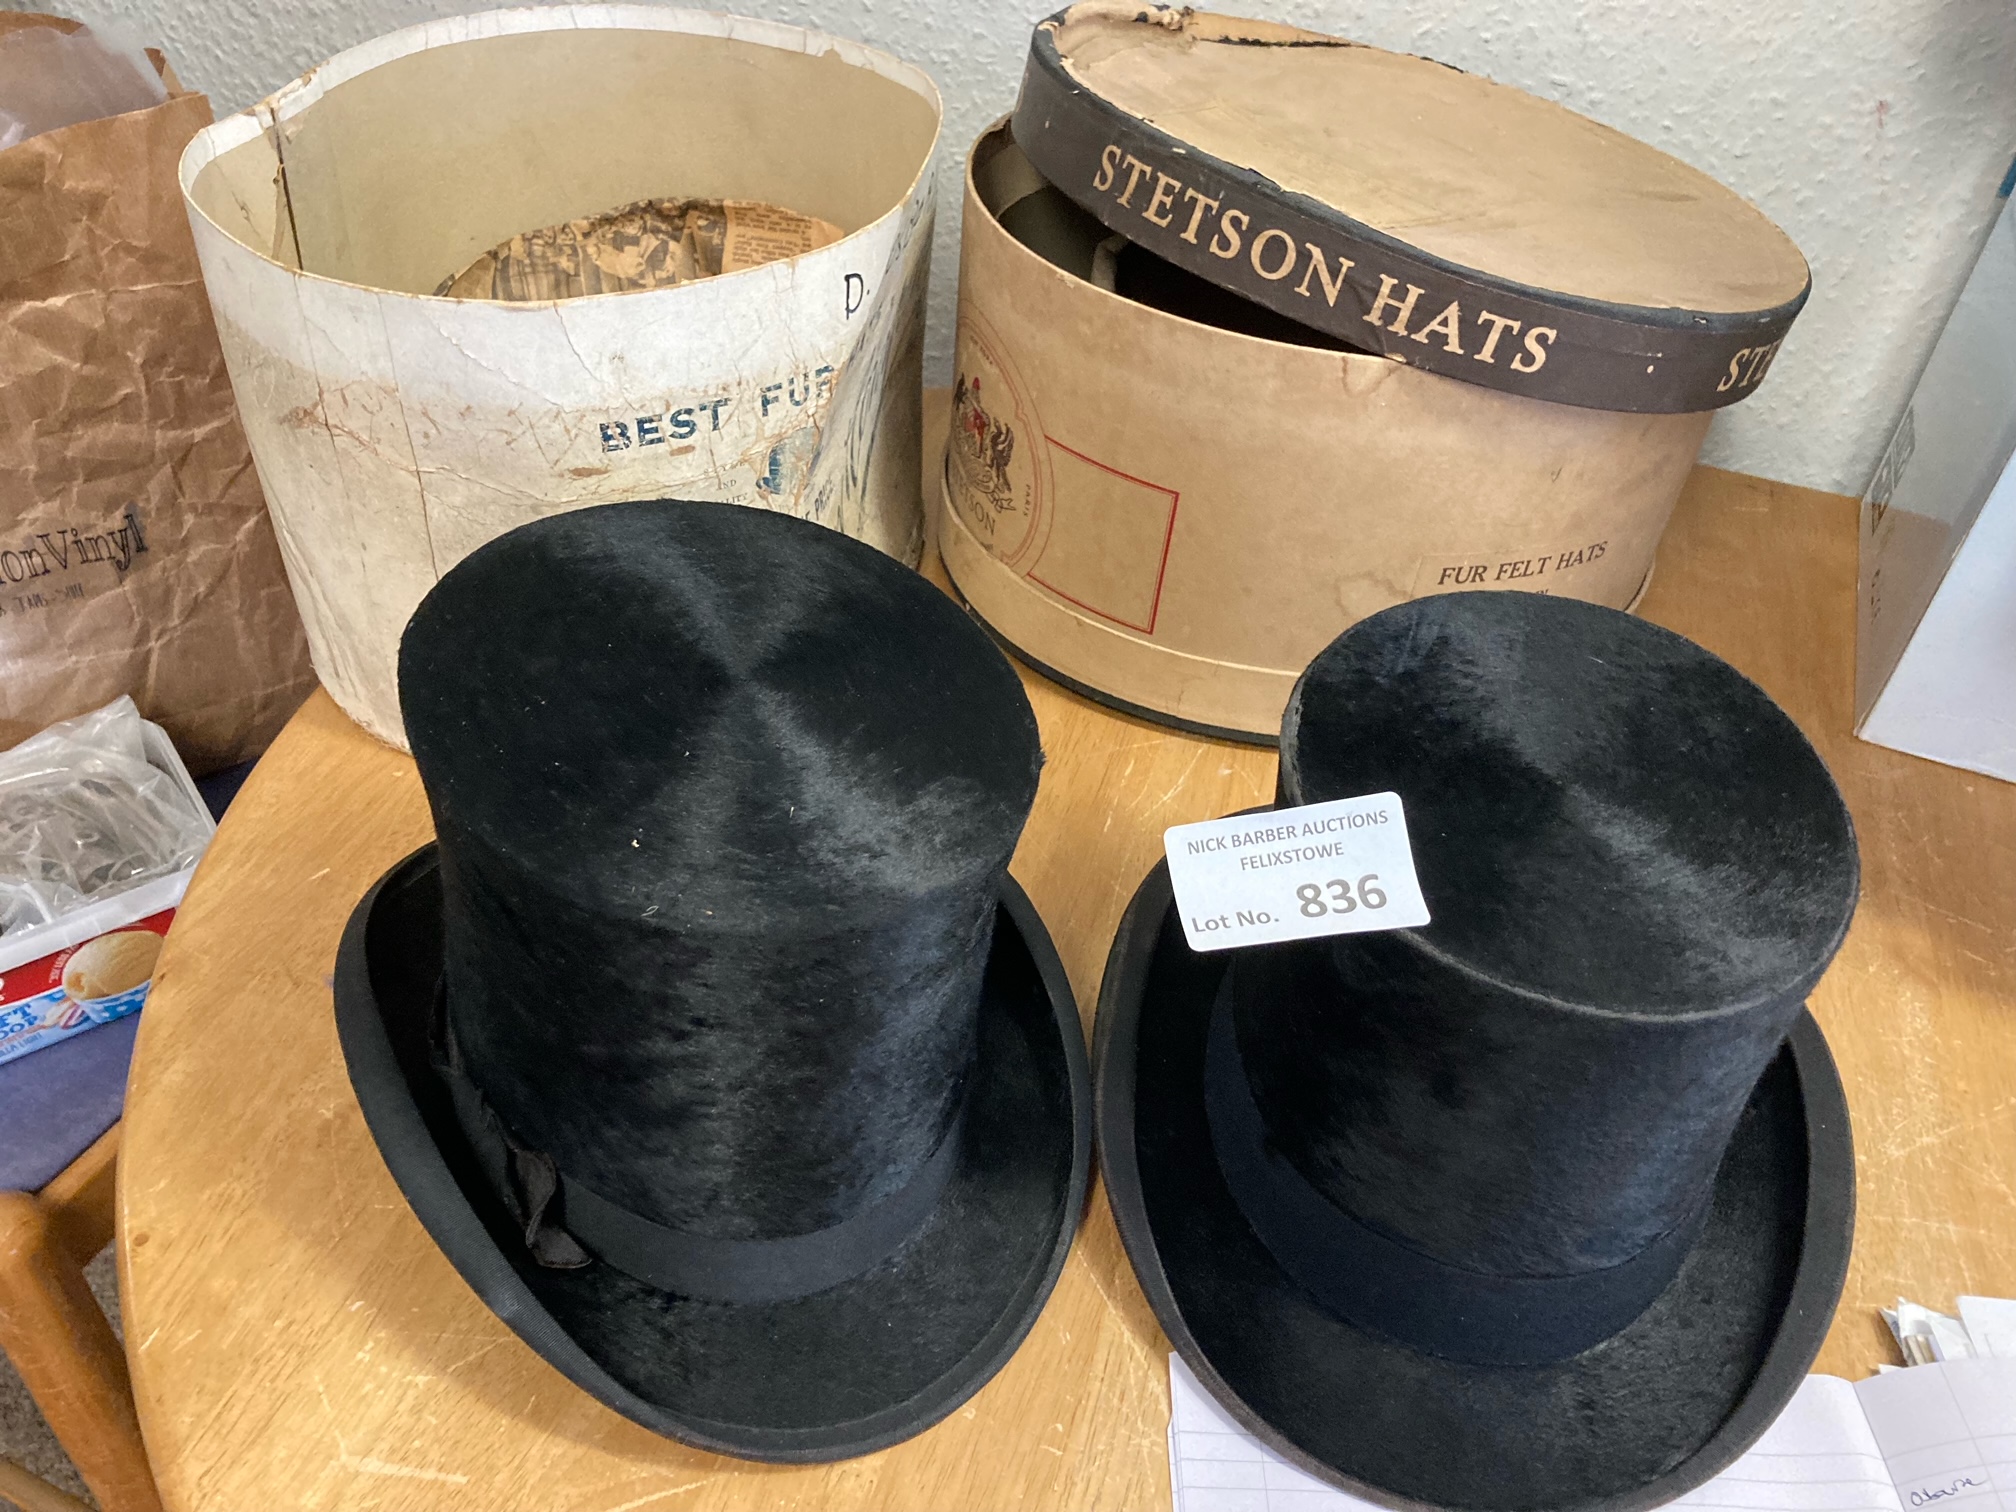 Collectables : 2 top hats within boxes - nice vint